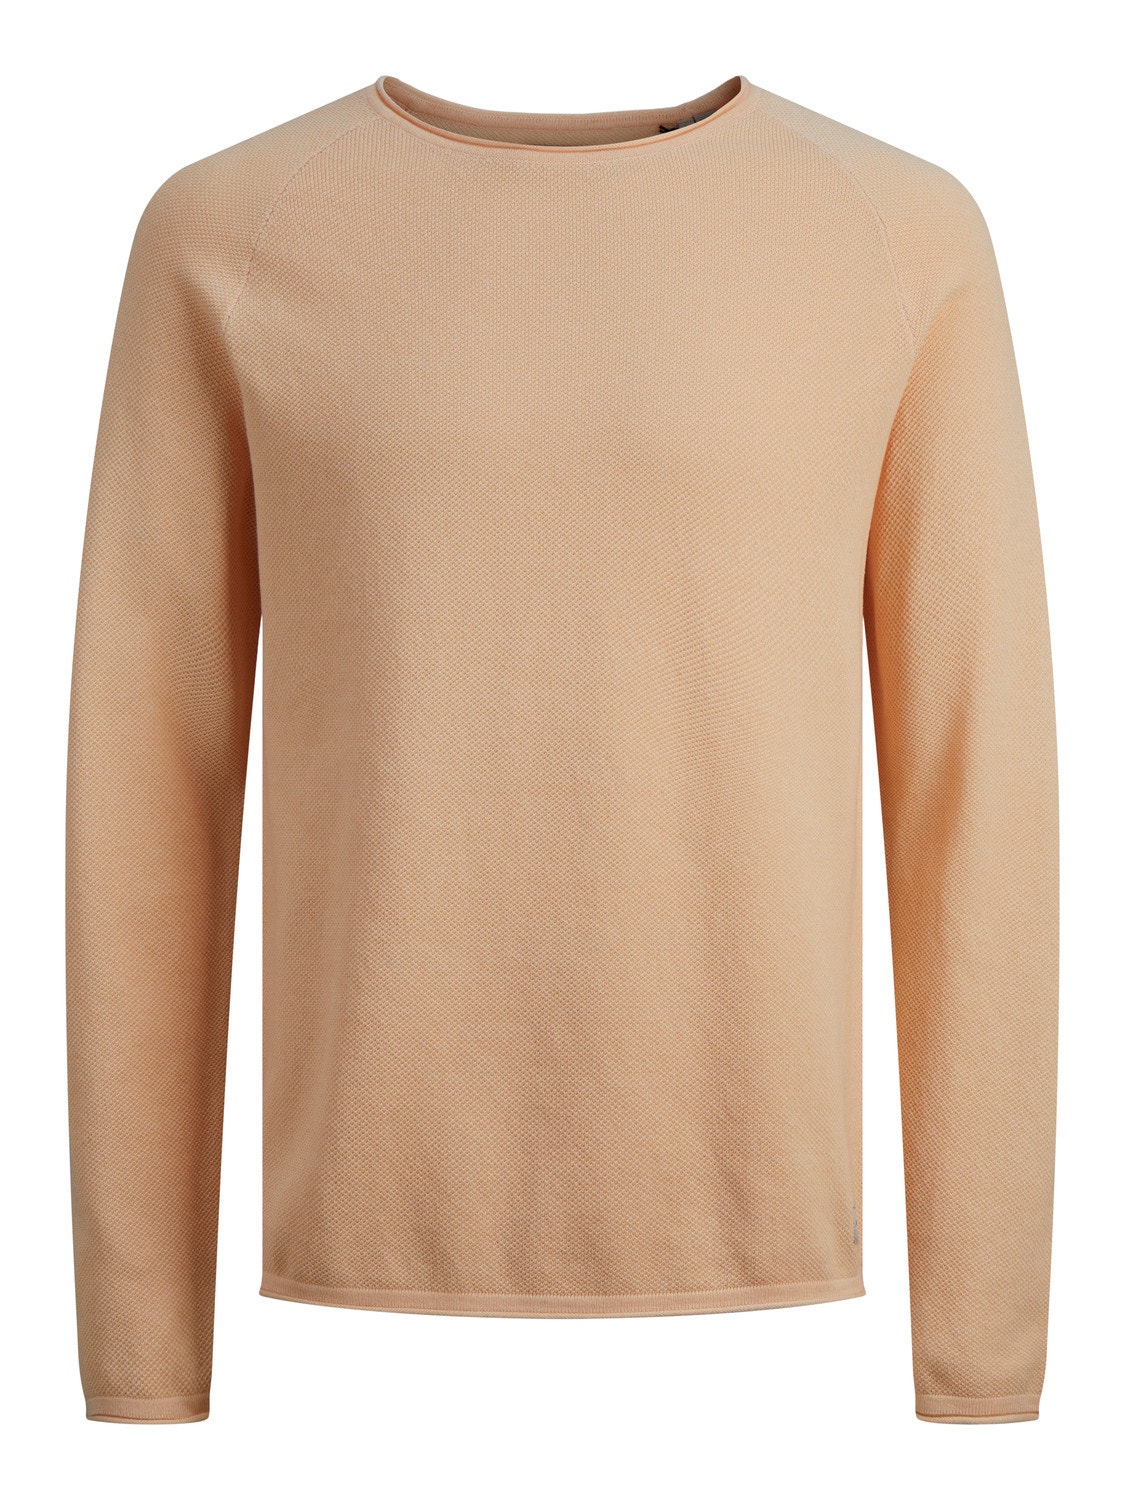 Jack & Jones Plain Knitted pullover -Apricot Ice  - 12157321